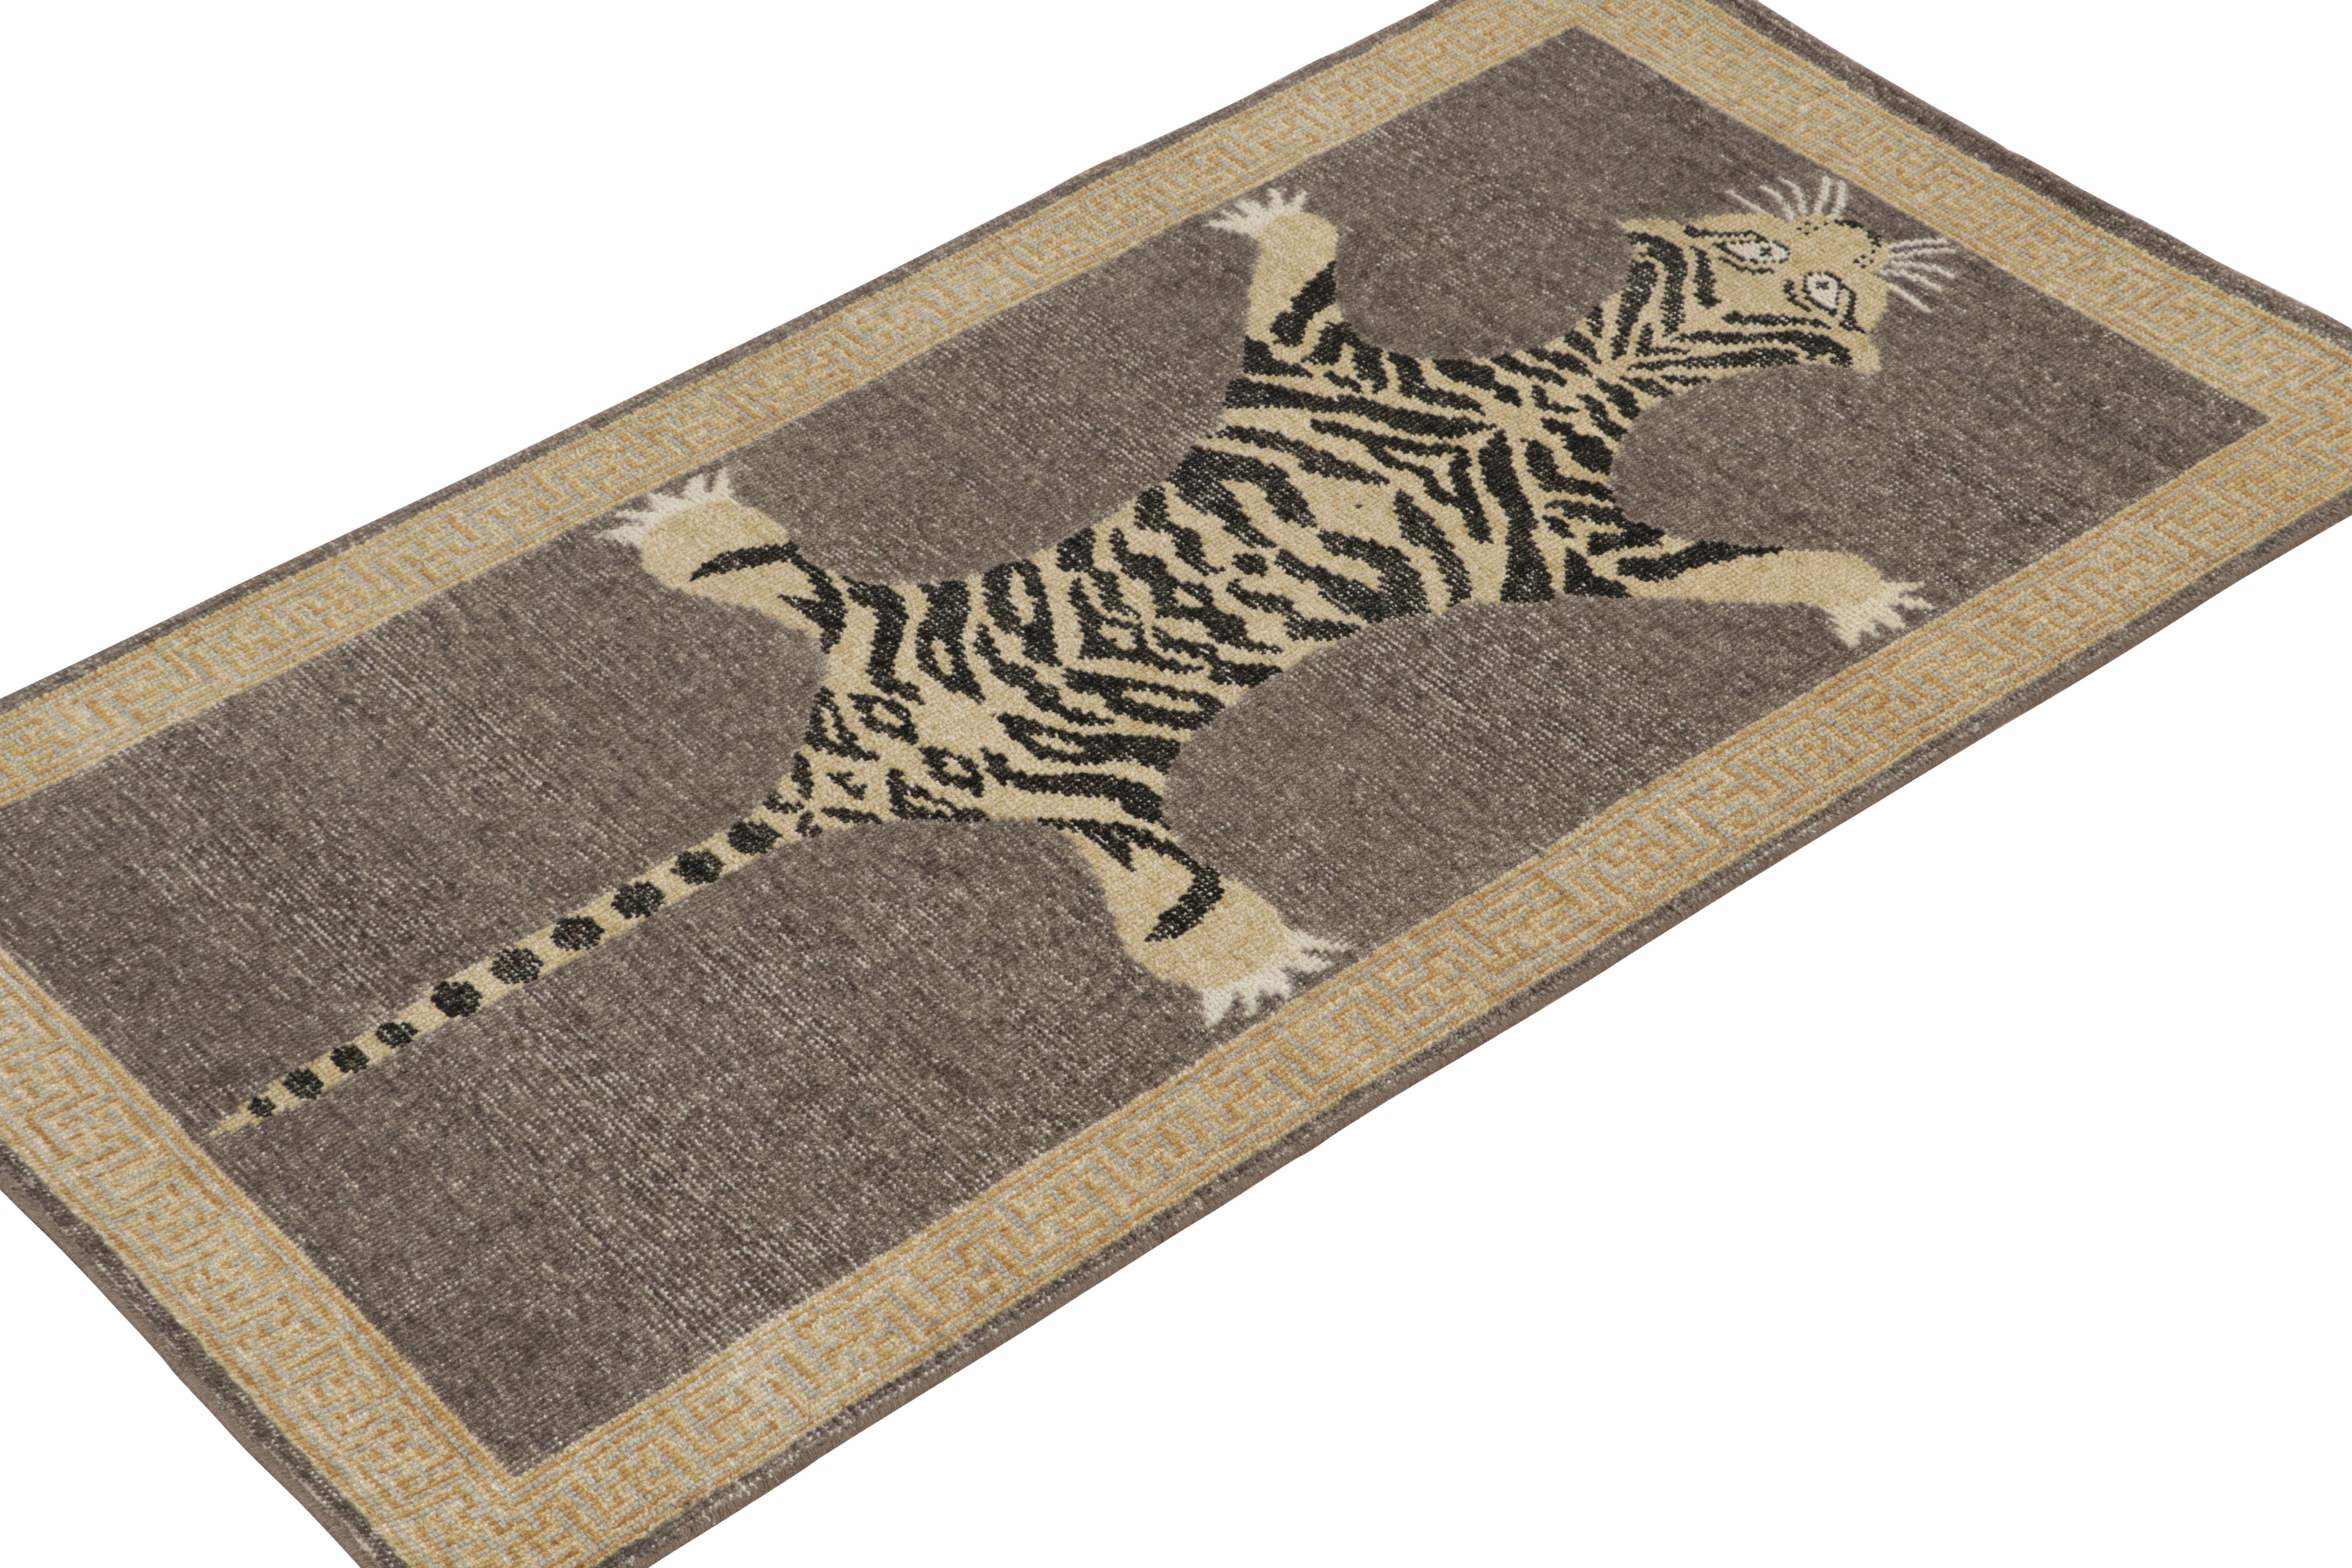 Indian Rug & Kilim’s Distressed Style Tiger Runner in Gray, Beige and Black Pictorial For Sale